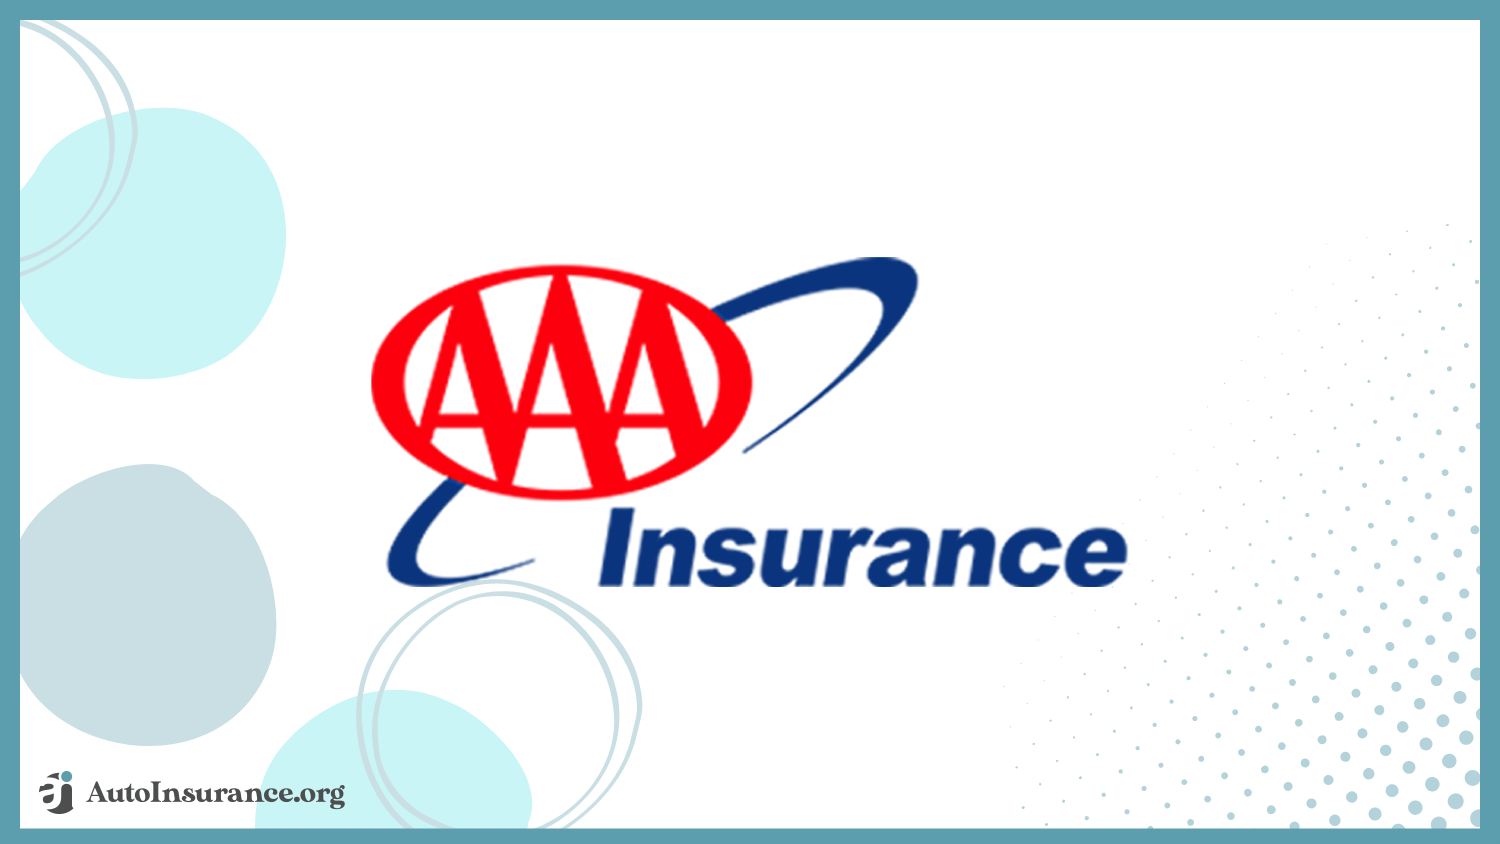 AAA: Best Auto Insurance for Amputees